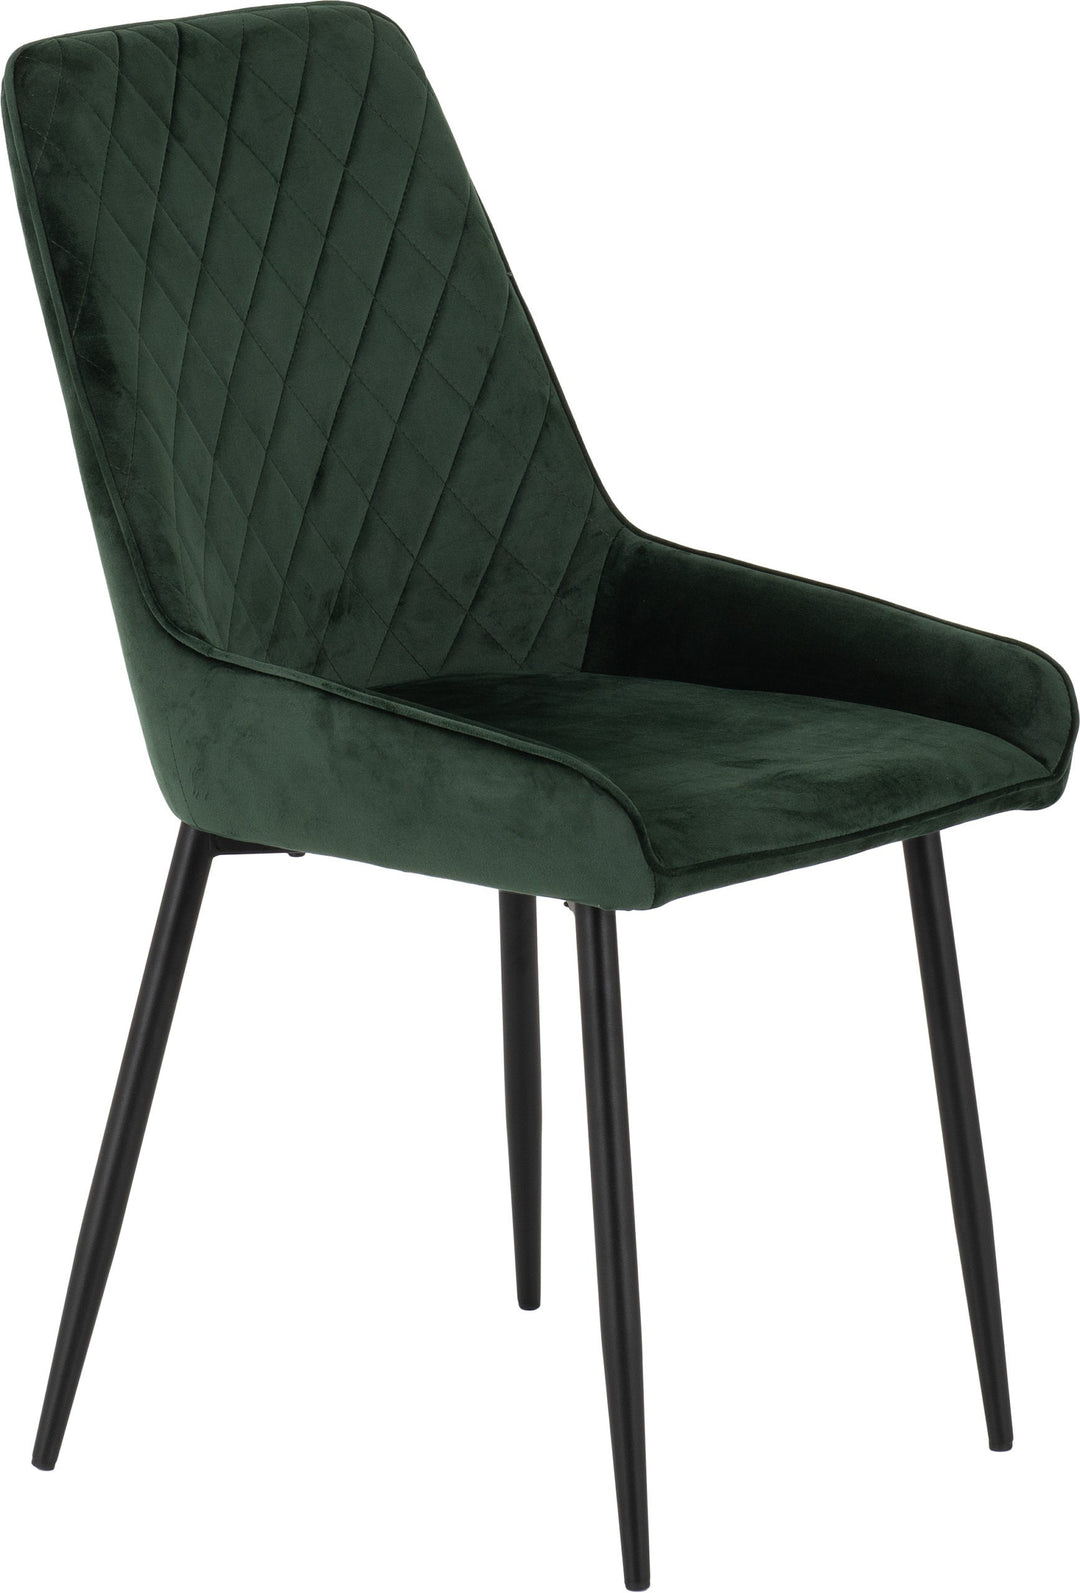 Athens Round & Avery Dining Set (X4 Chairs) - Concrete/Emerald Green Velvet